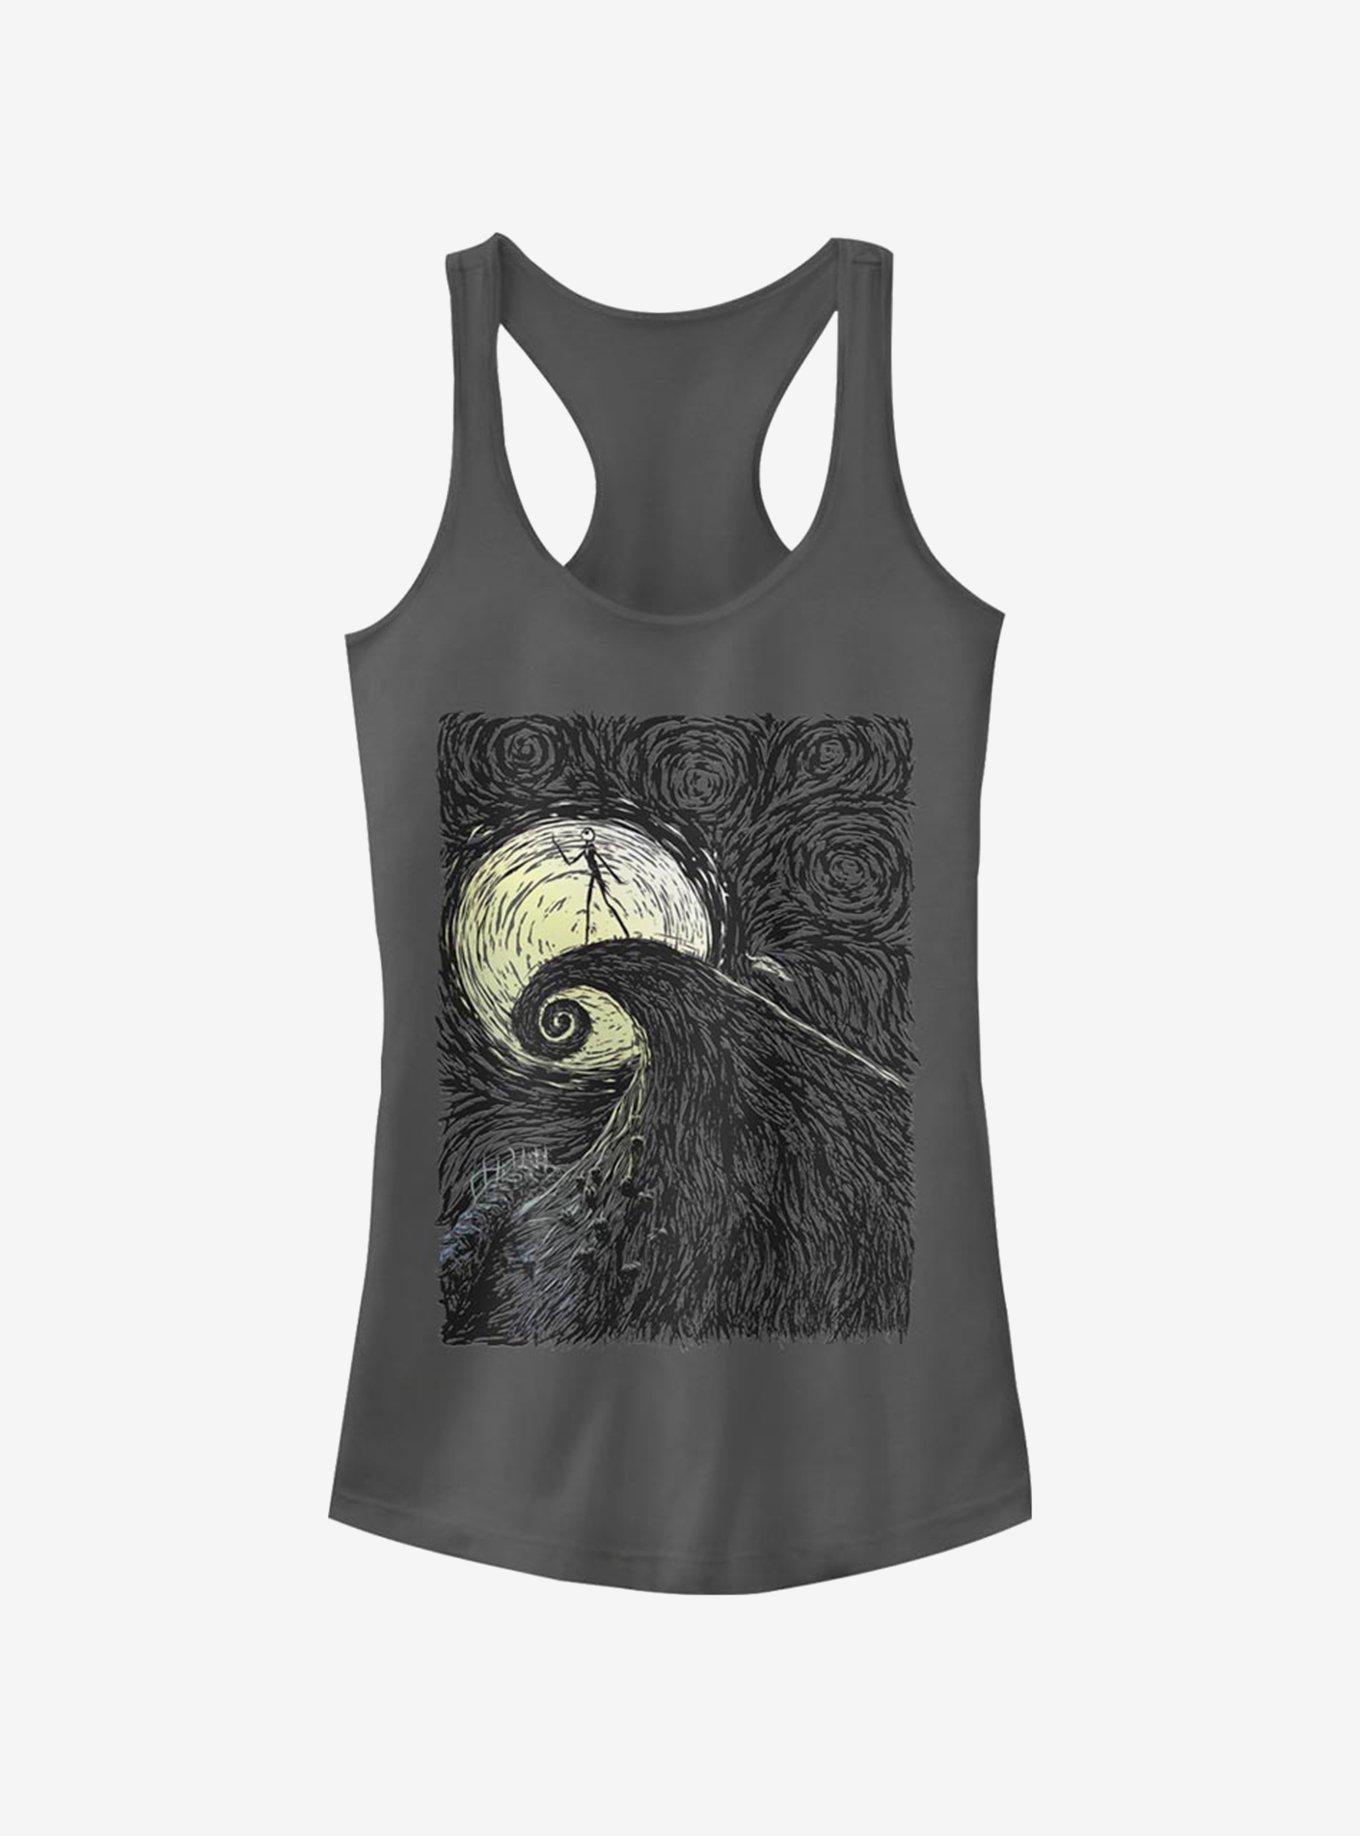 The Nightmare Before Christmas Spiral Hill Girls Tank